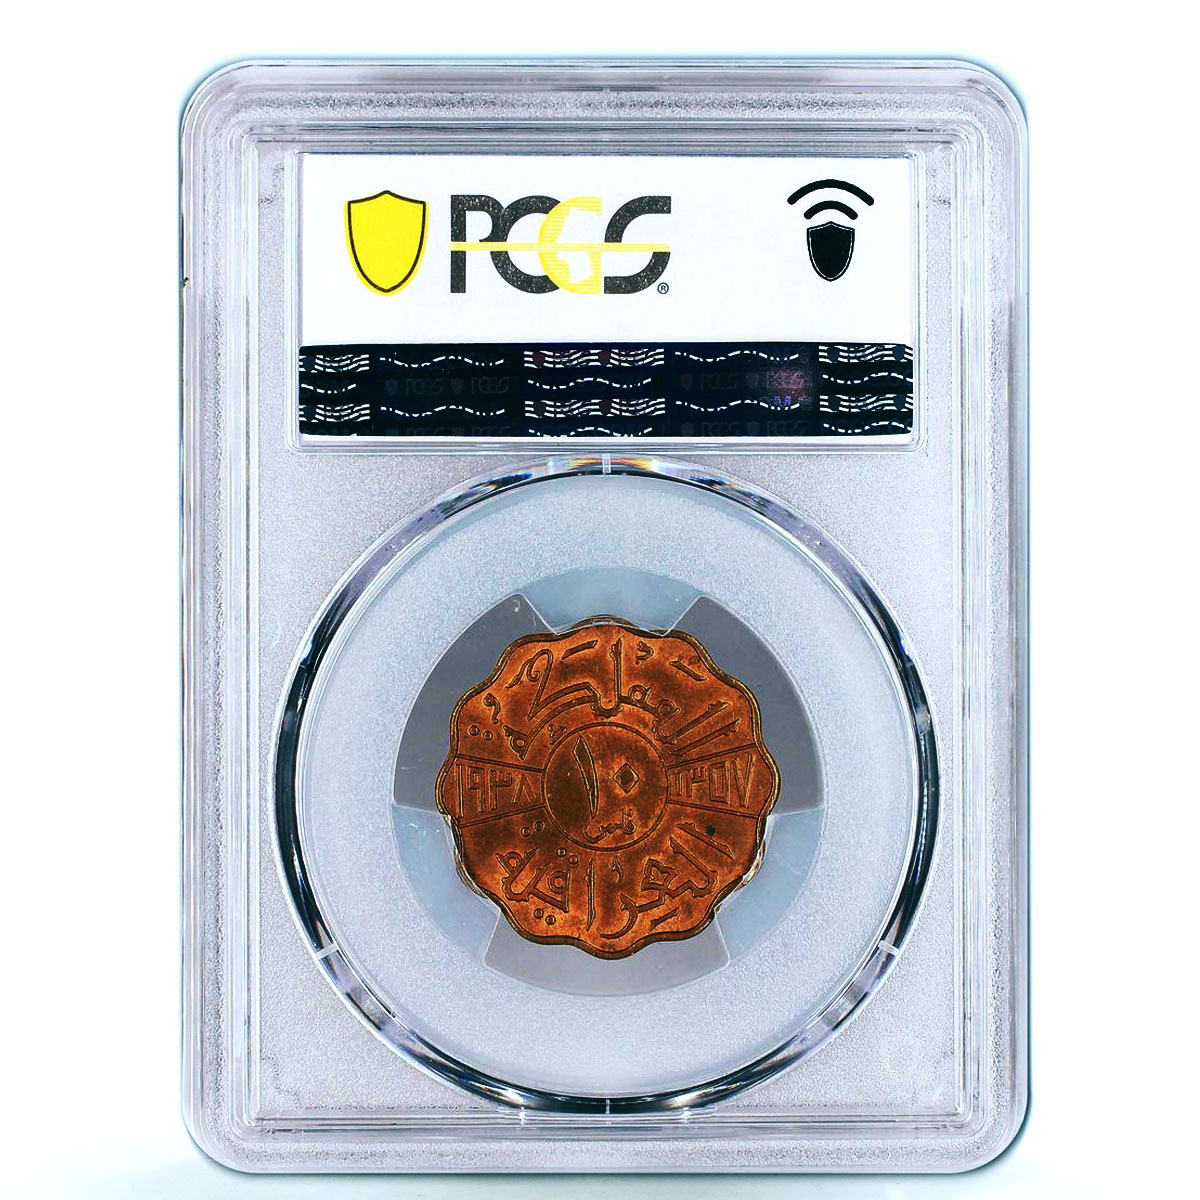 Iraq 10 fils State Coinage King Ghazi Coat of Arms MS63RB PCGS bronze coin 1938